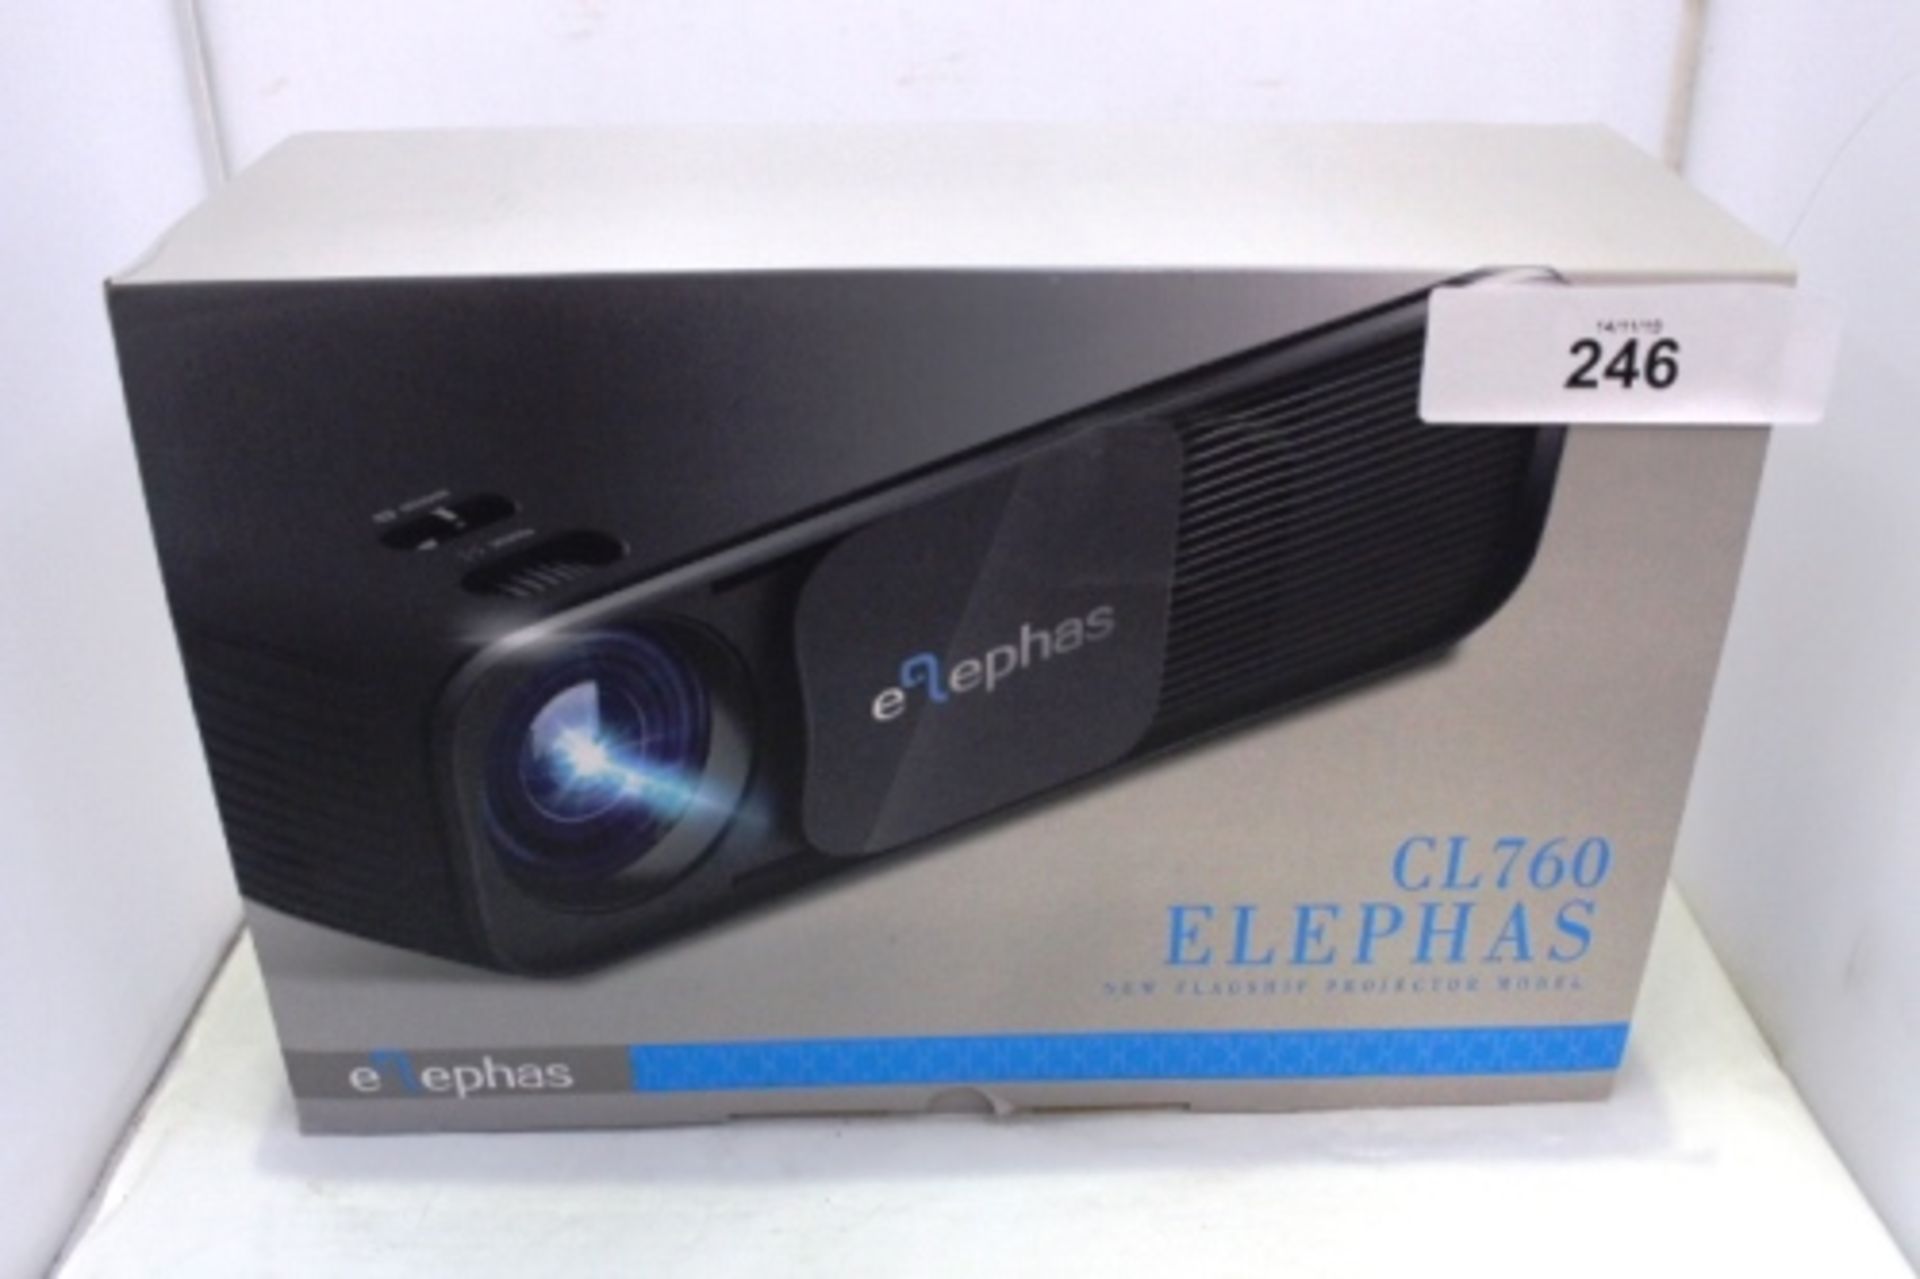 An Elephas CL760 HP projector. This item has not been tested or warranted by us and hence no refunds